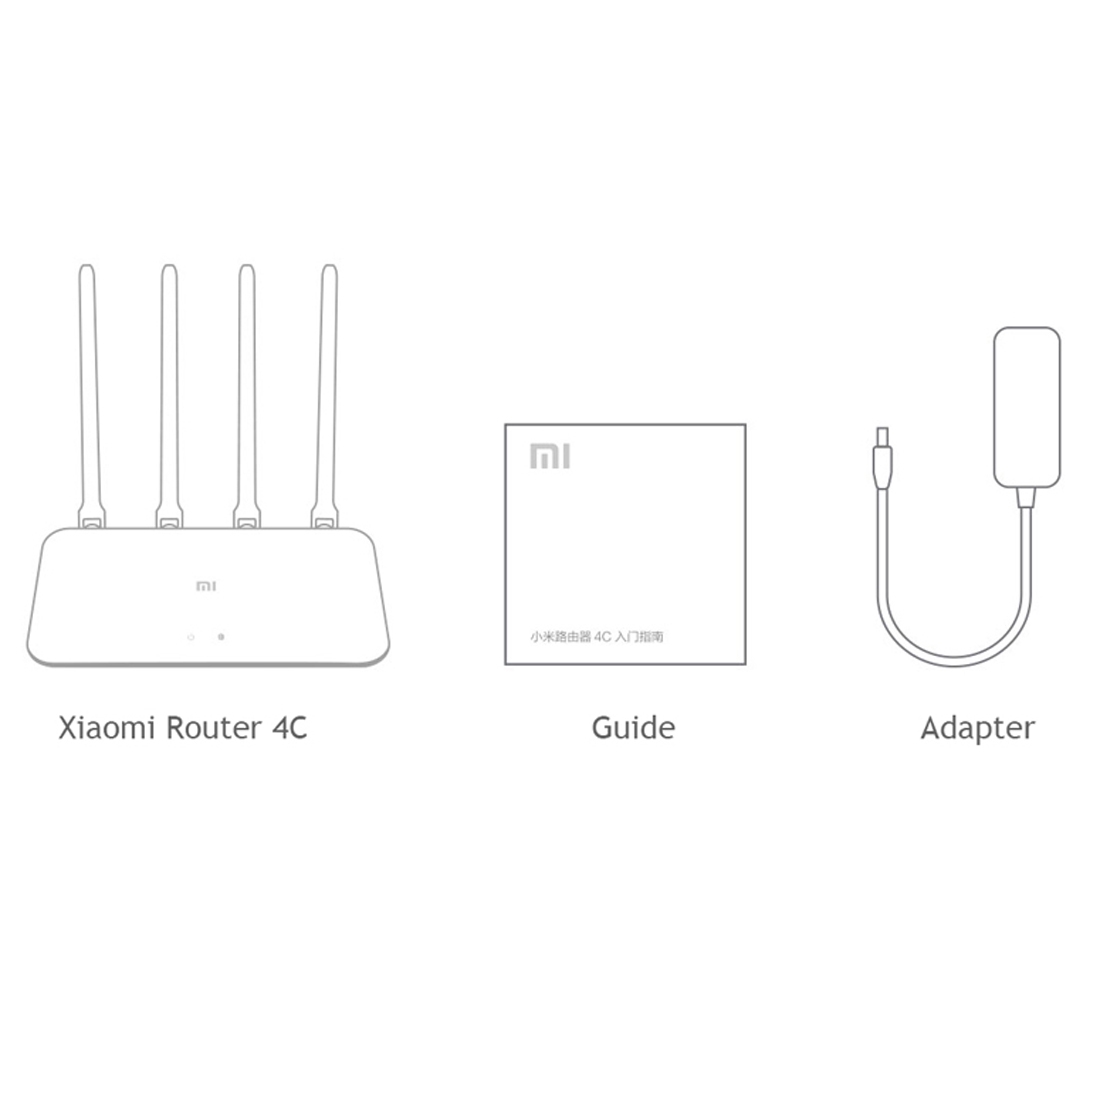 Original Xiaomi Mi WiFi Router 4C Smart APP Control 300Mbps 2.4GHz Wireless Router Repeater with 4 Antennas, Support Web & Android & iOS, US Plug (White)